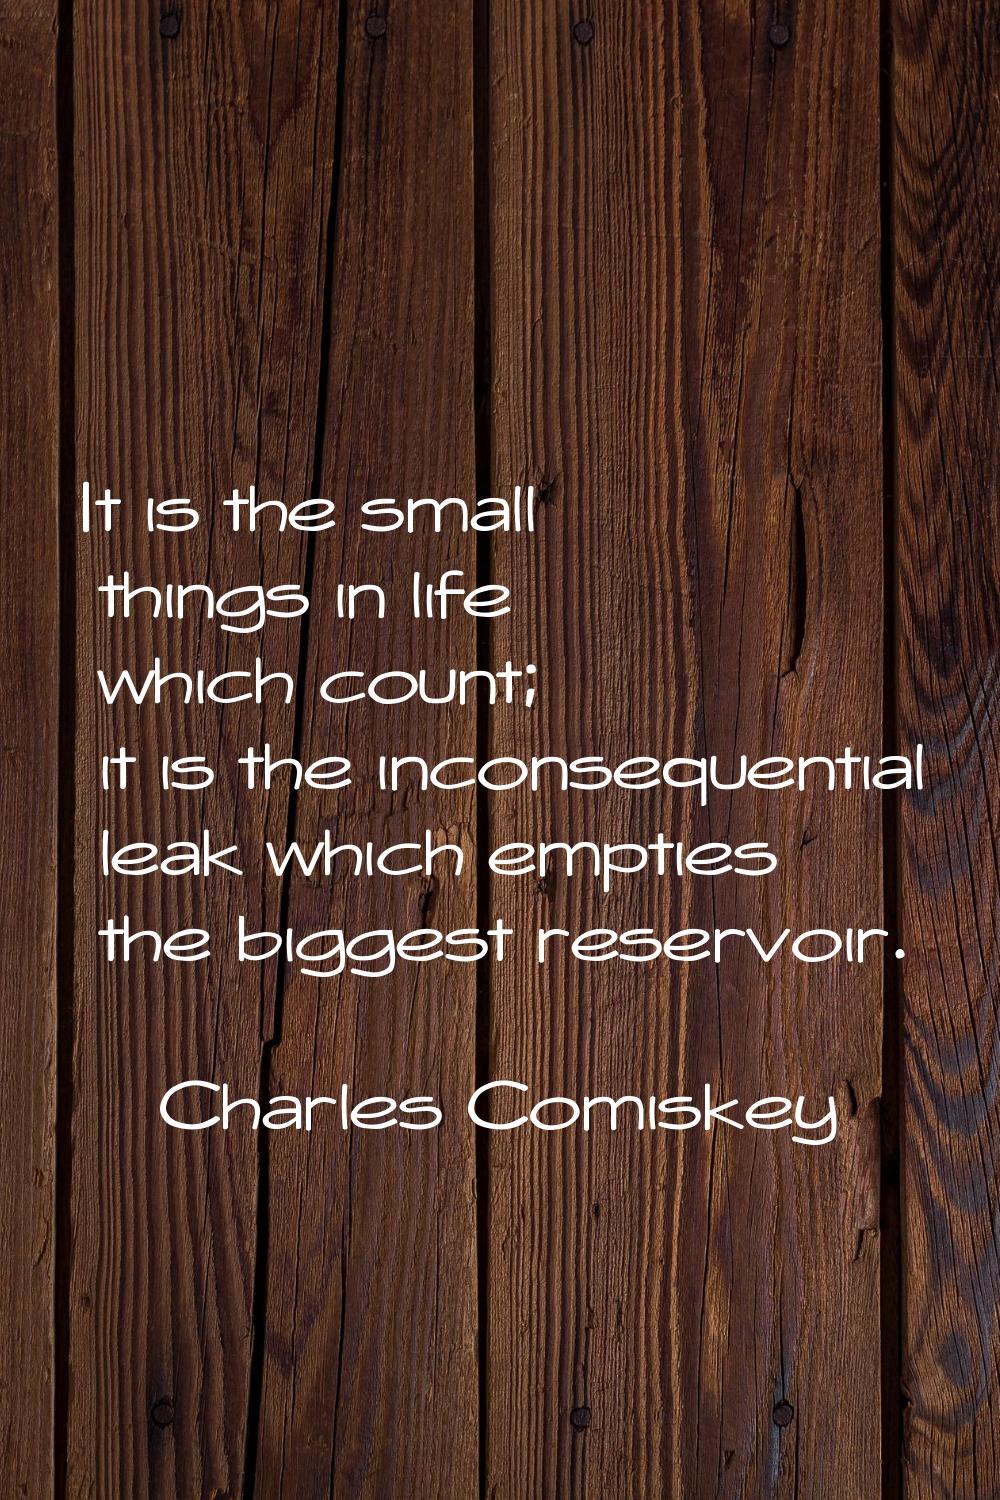 It is the small things in life which count; it is the inconsequential leak which empties the bigges